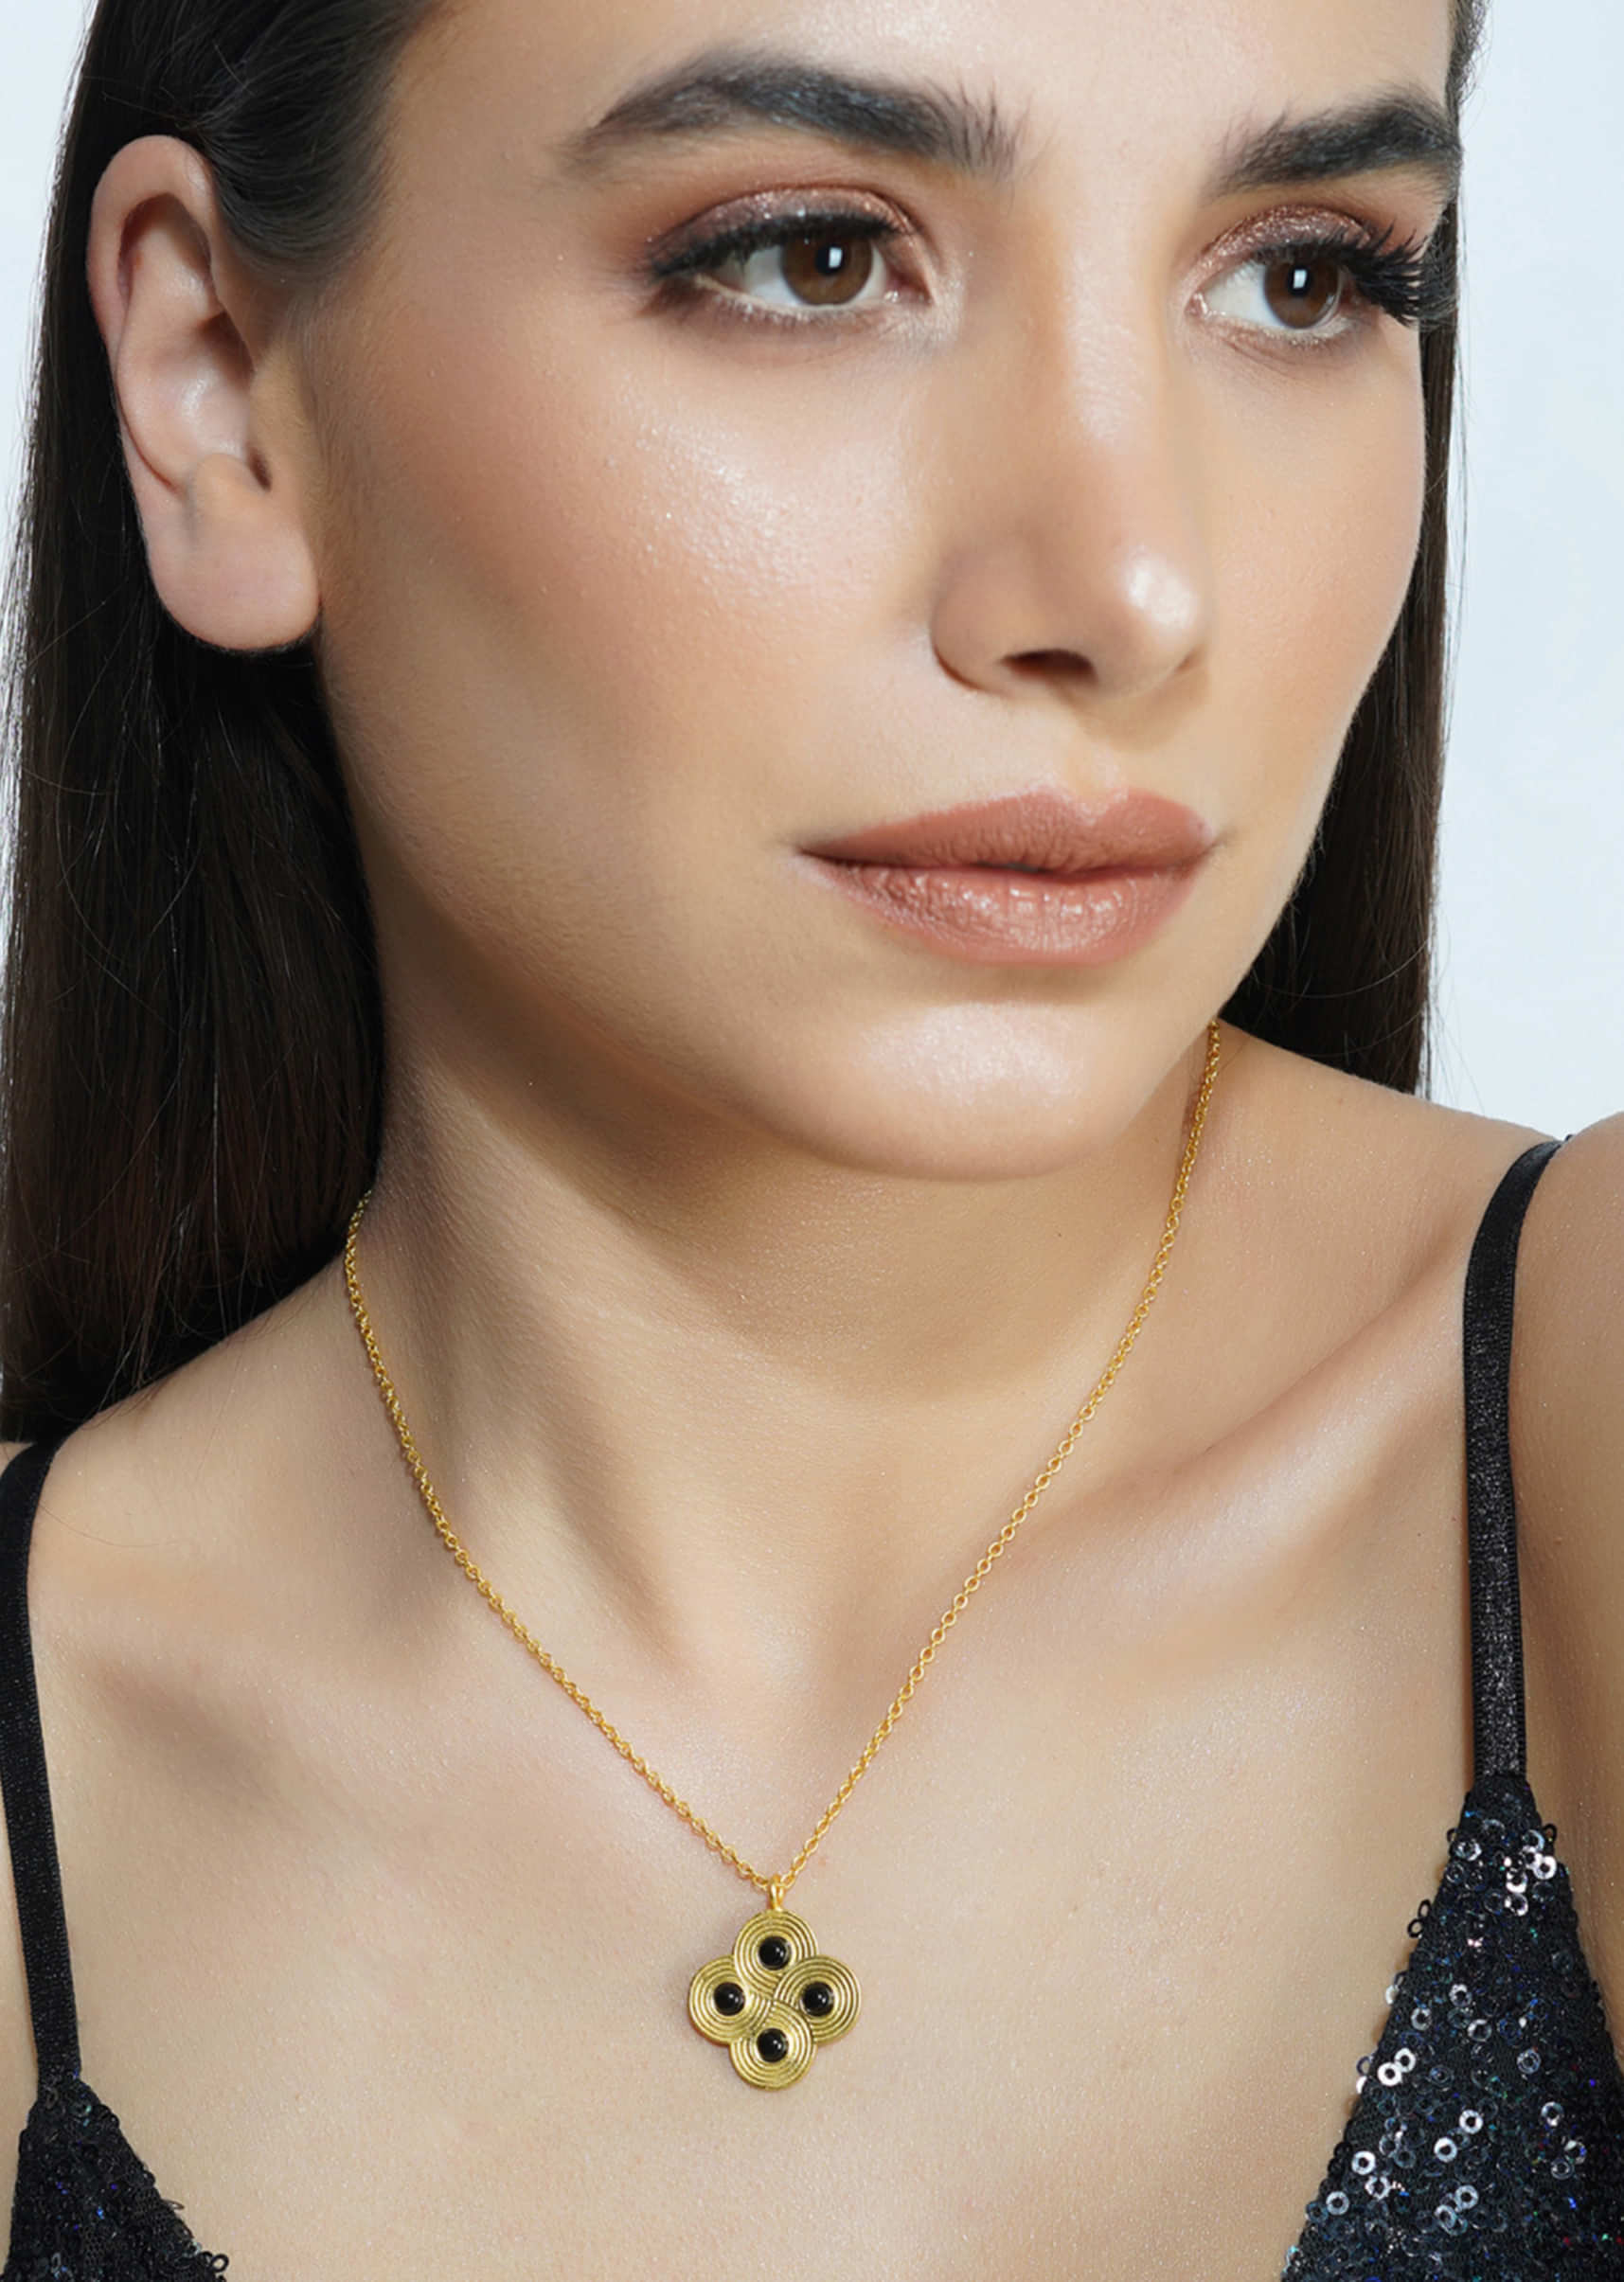 Gold Plated Necklace With A Pendant Studded With Onyx Stones